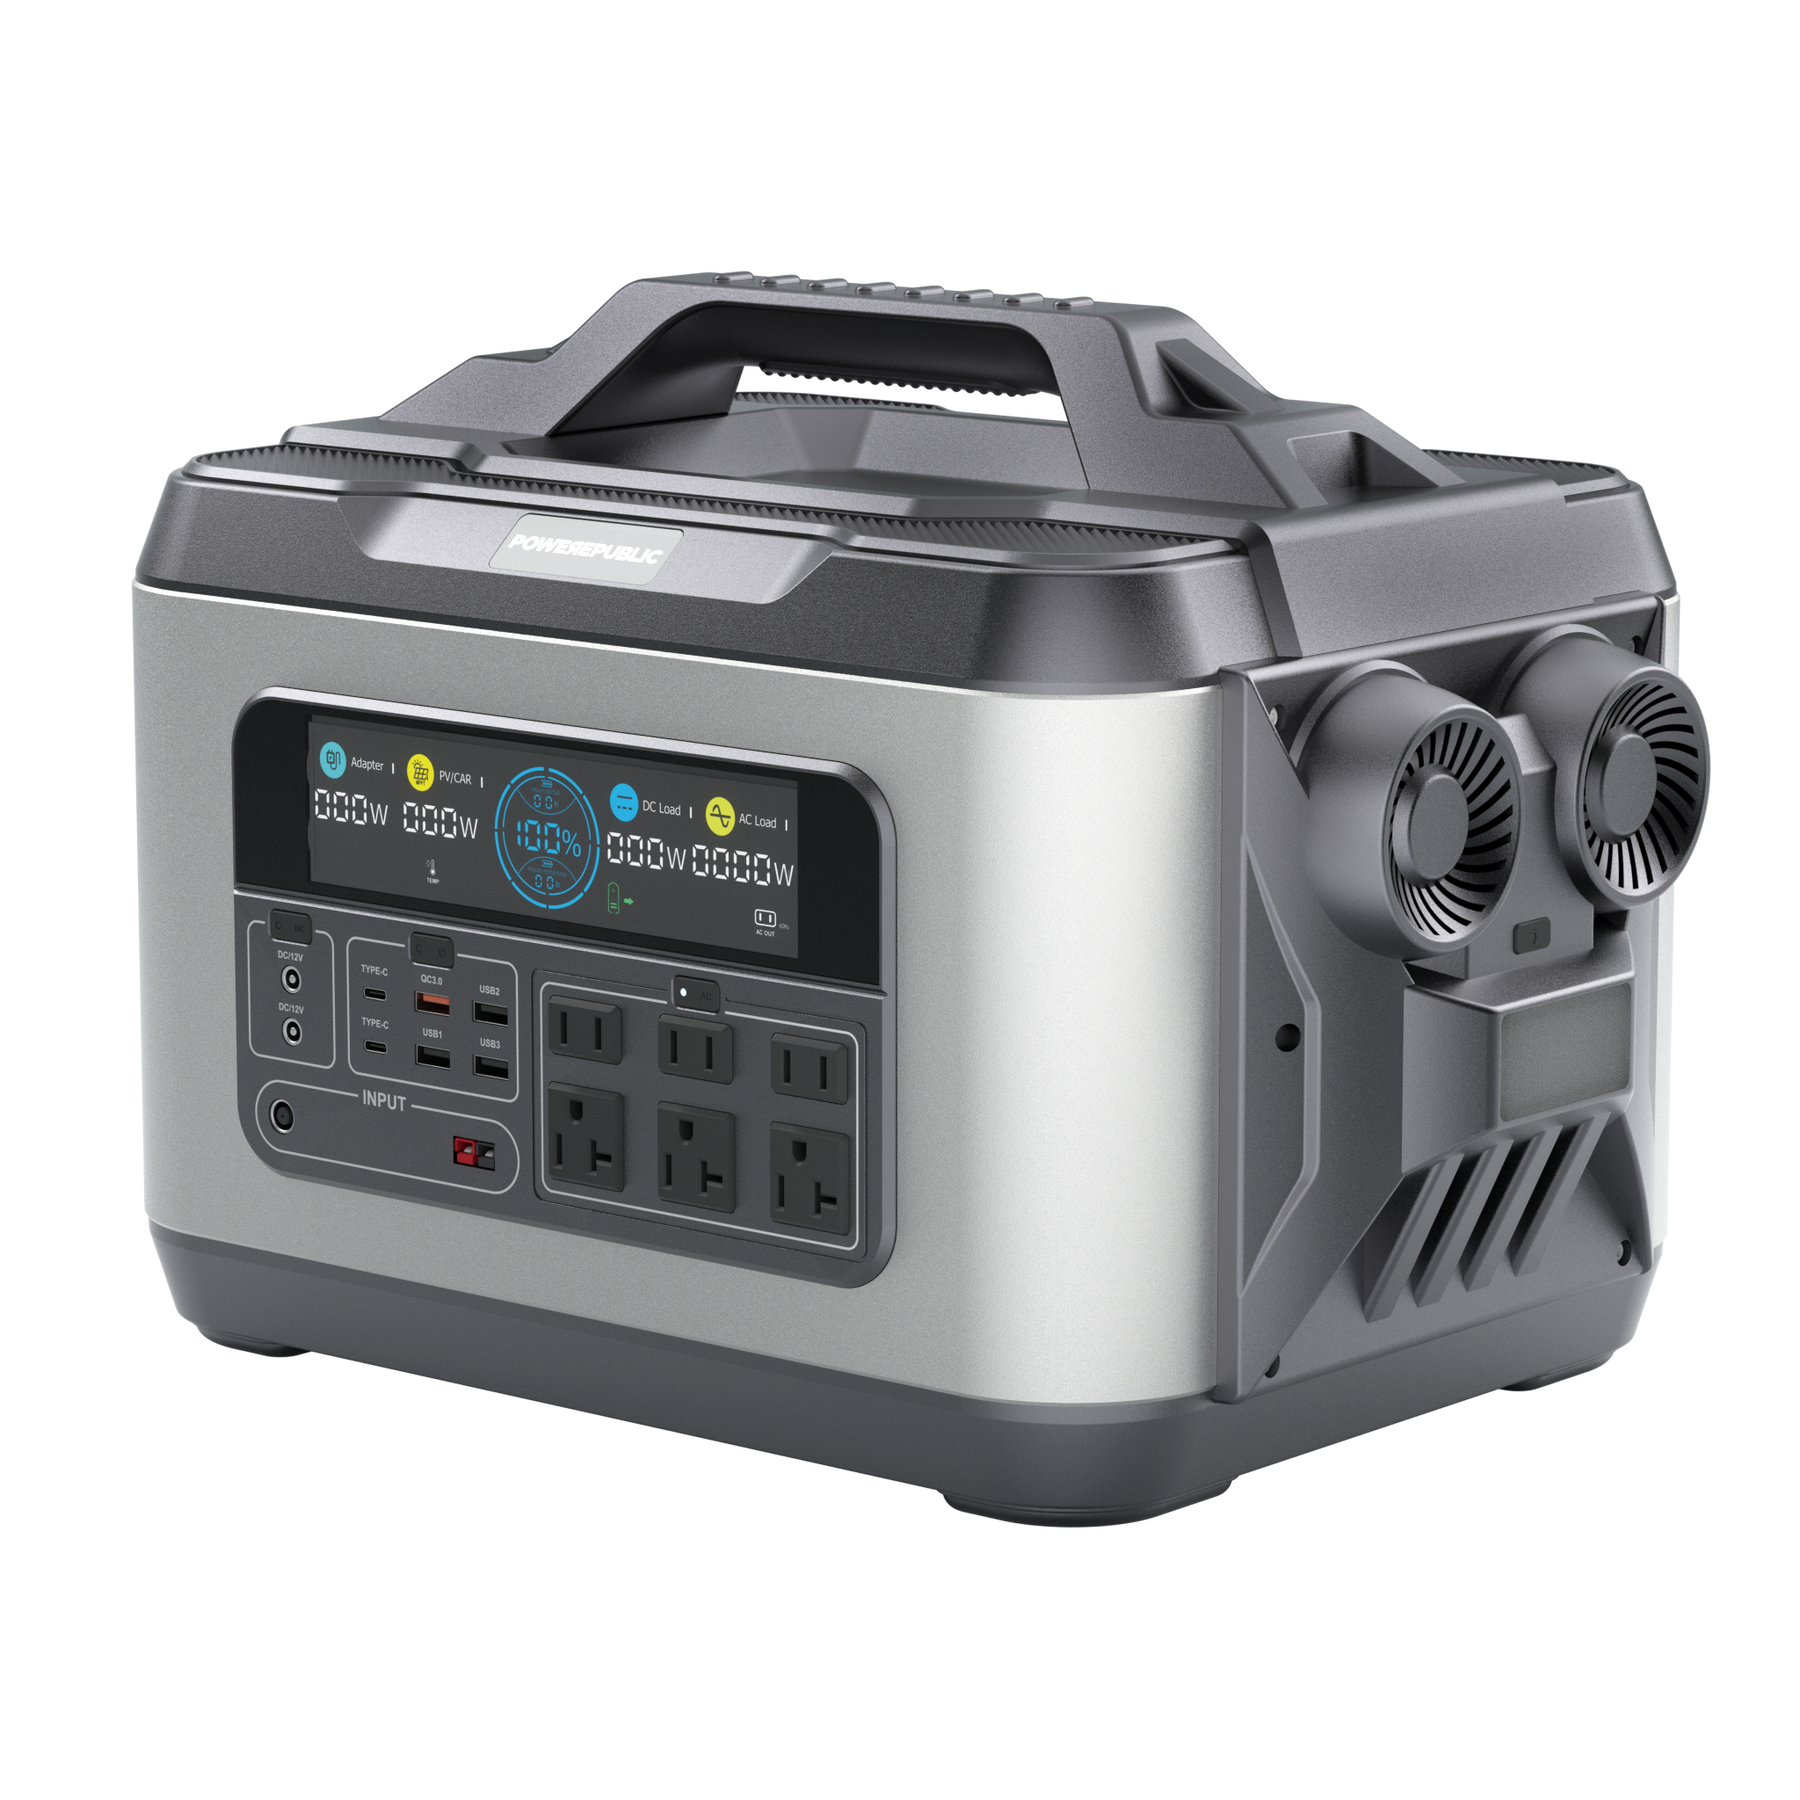 POWEREPUBLIC T2200 portable power station, 2200W 2240Wh, metallic gray aluminum-alloy body with turbine-engine design, an LED Light, a handle, an LCD screen, and input and output ports.